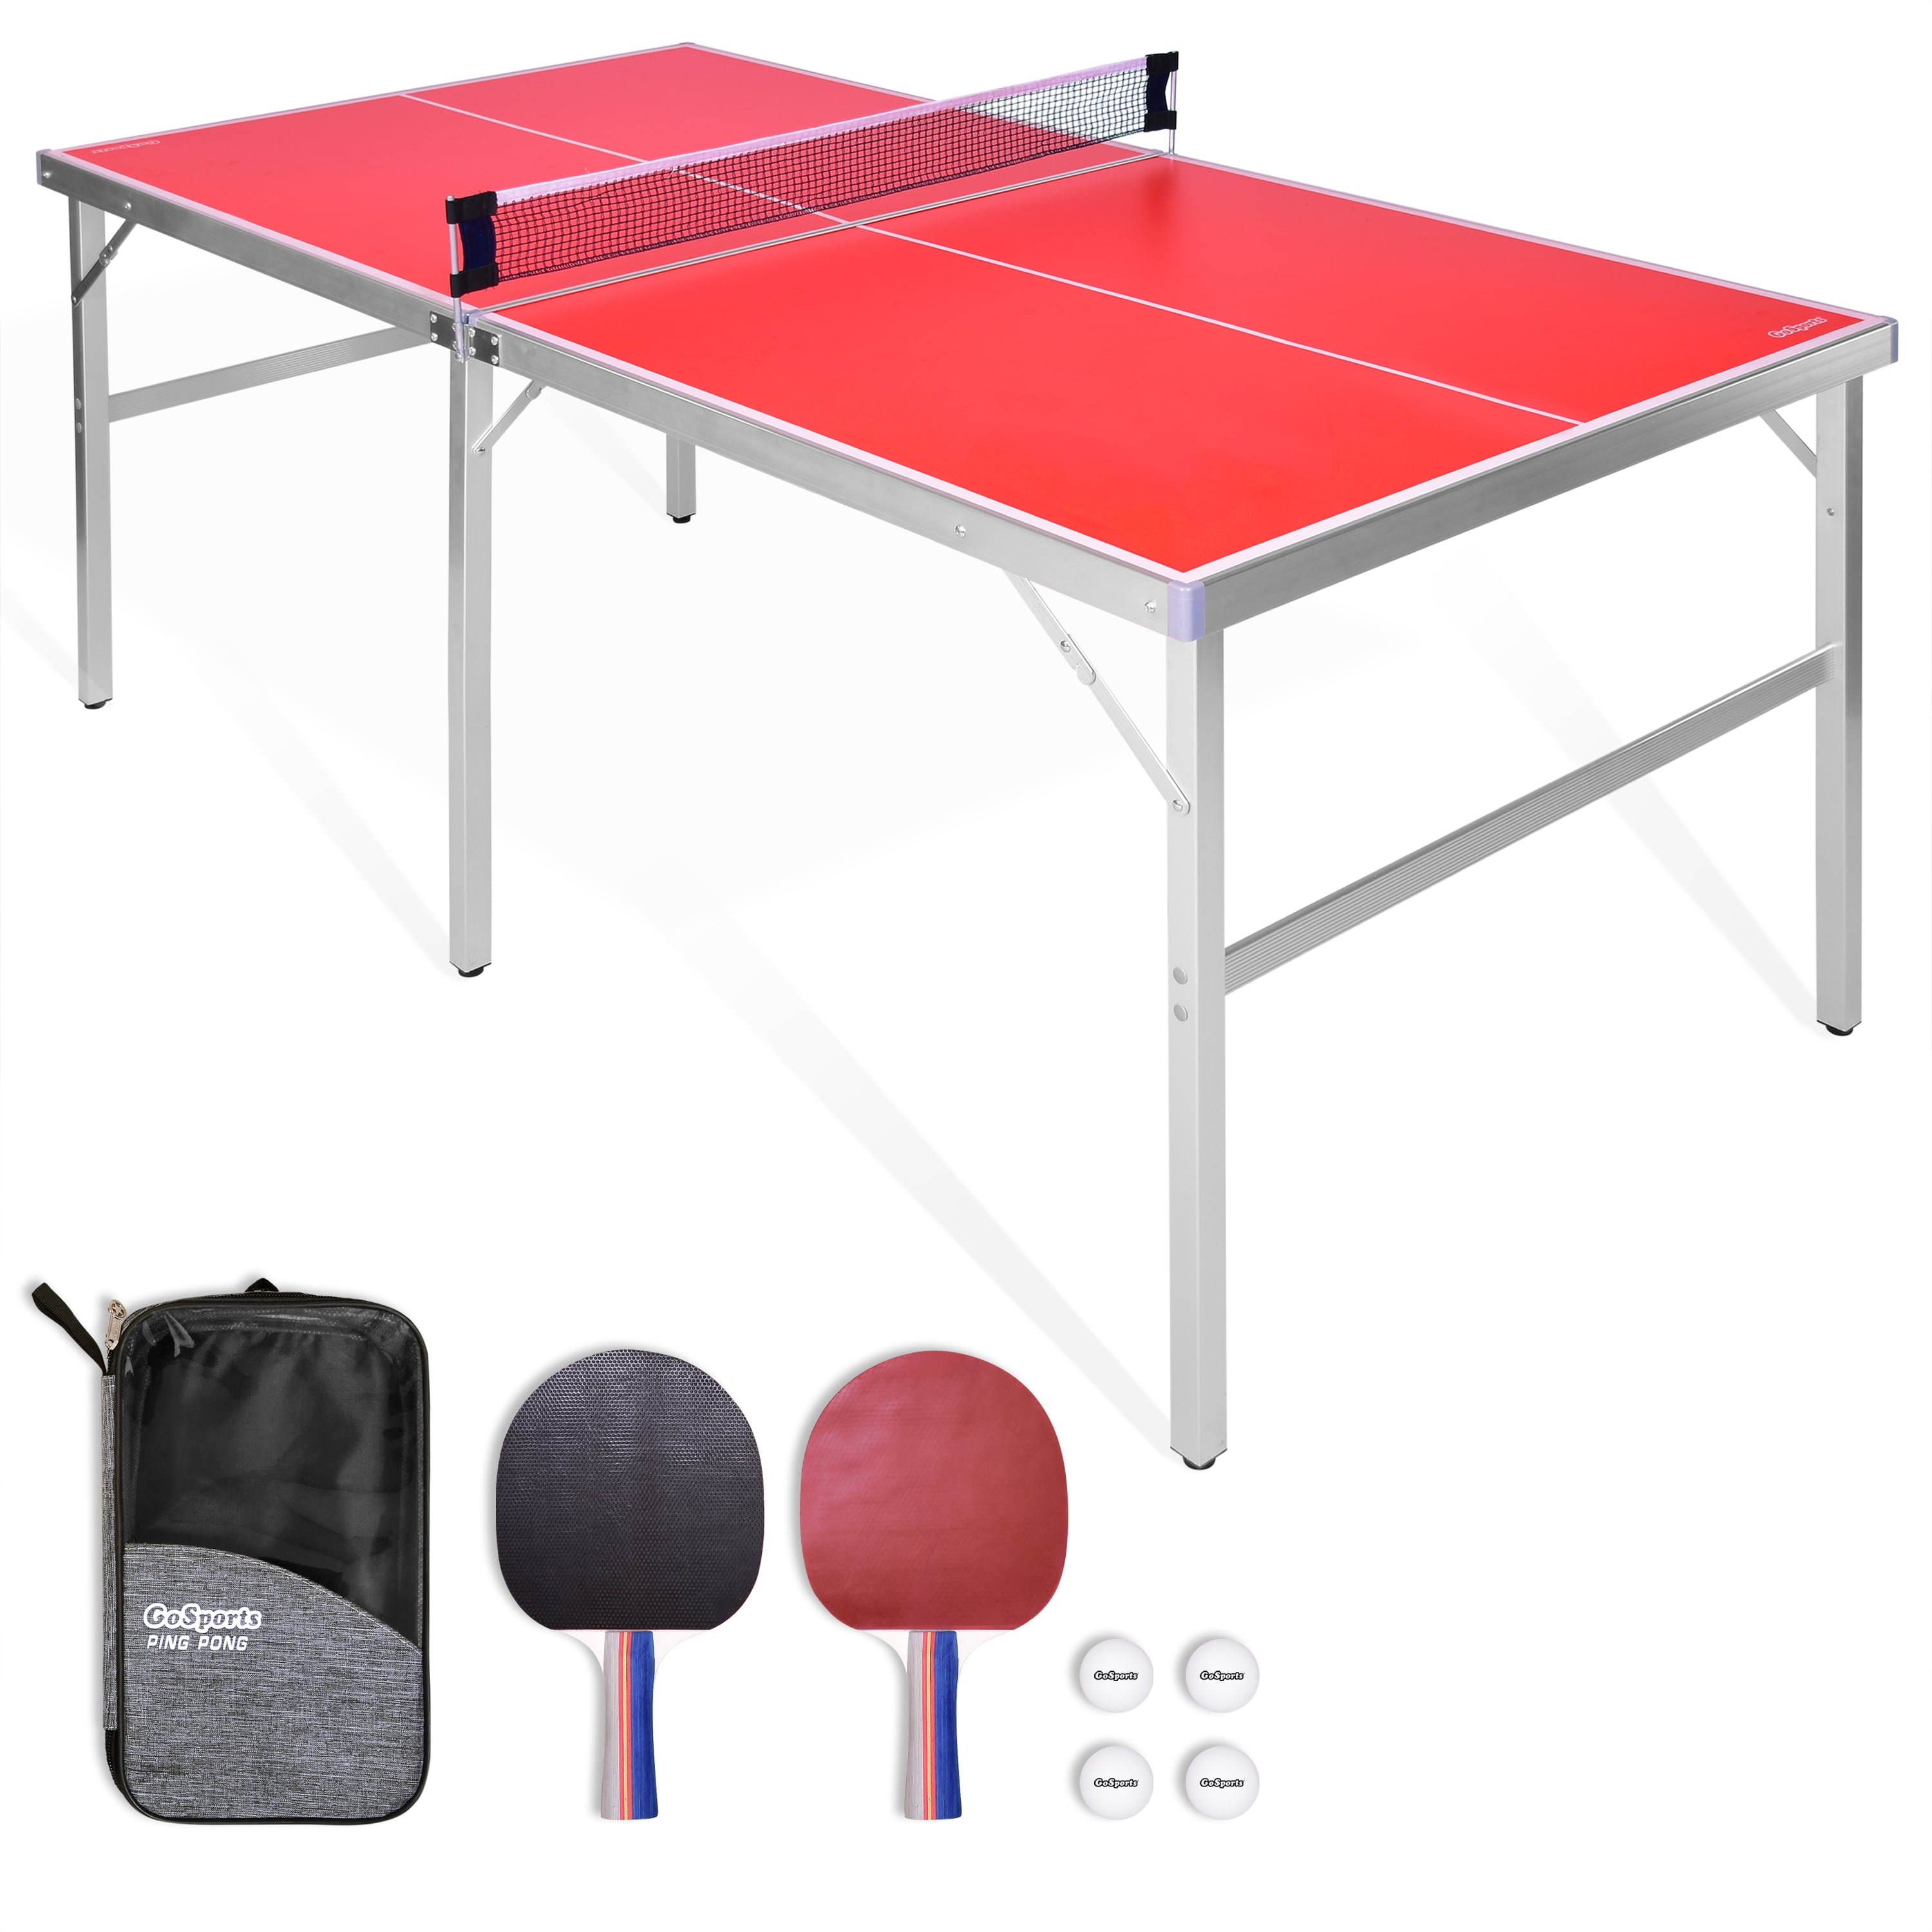 iPong Original Table Tennis Trainer Robot 2day Delivery for sale online 